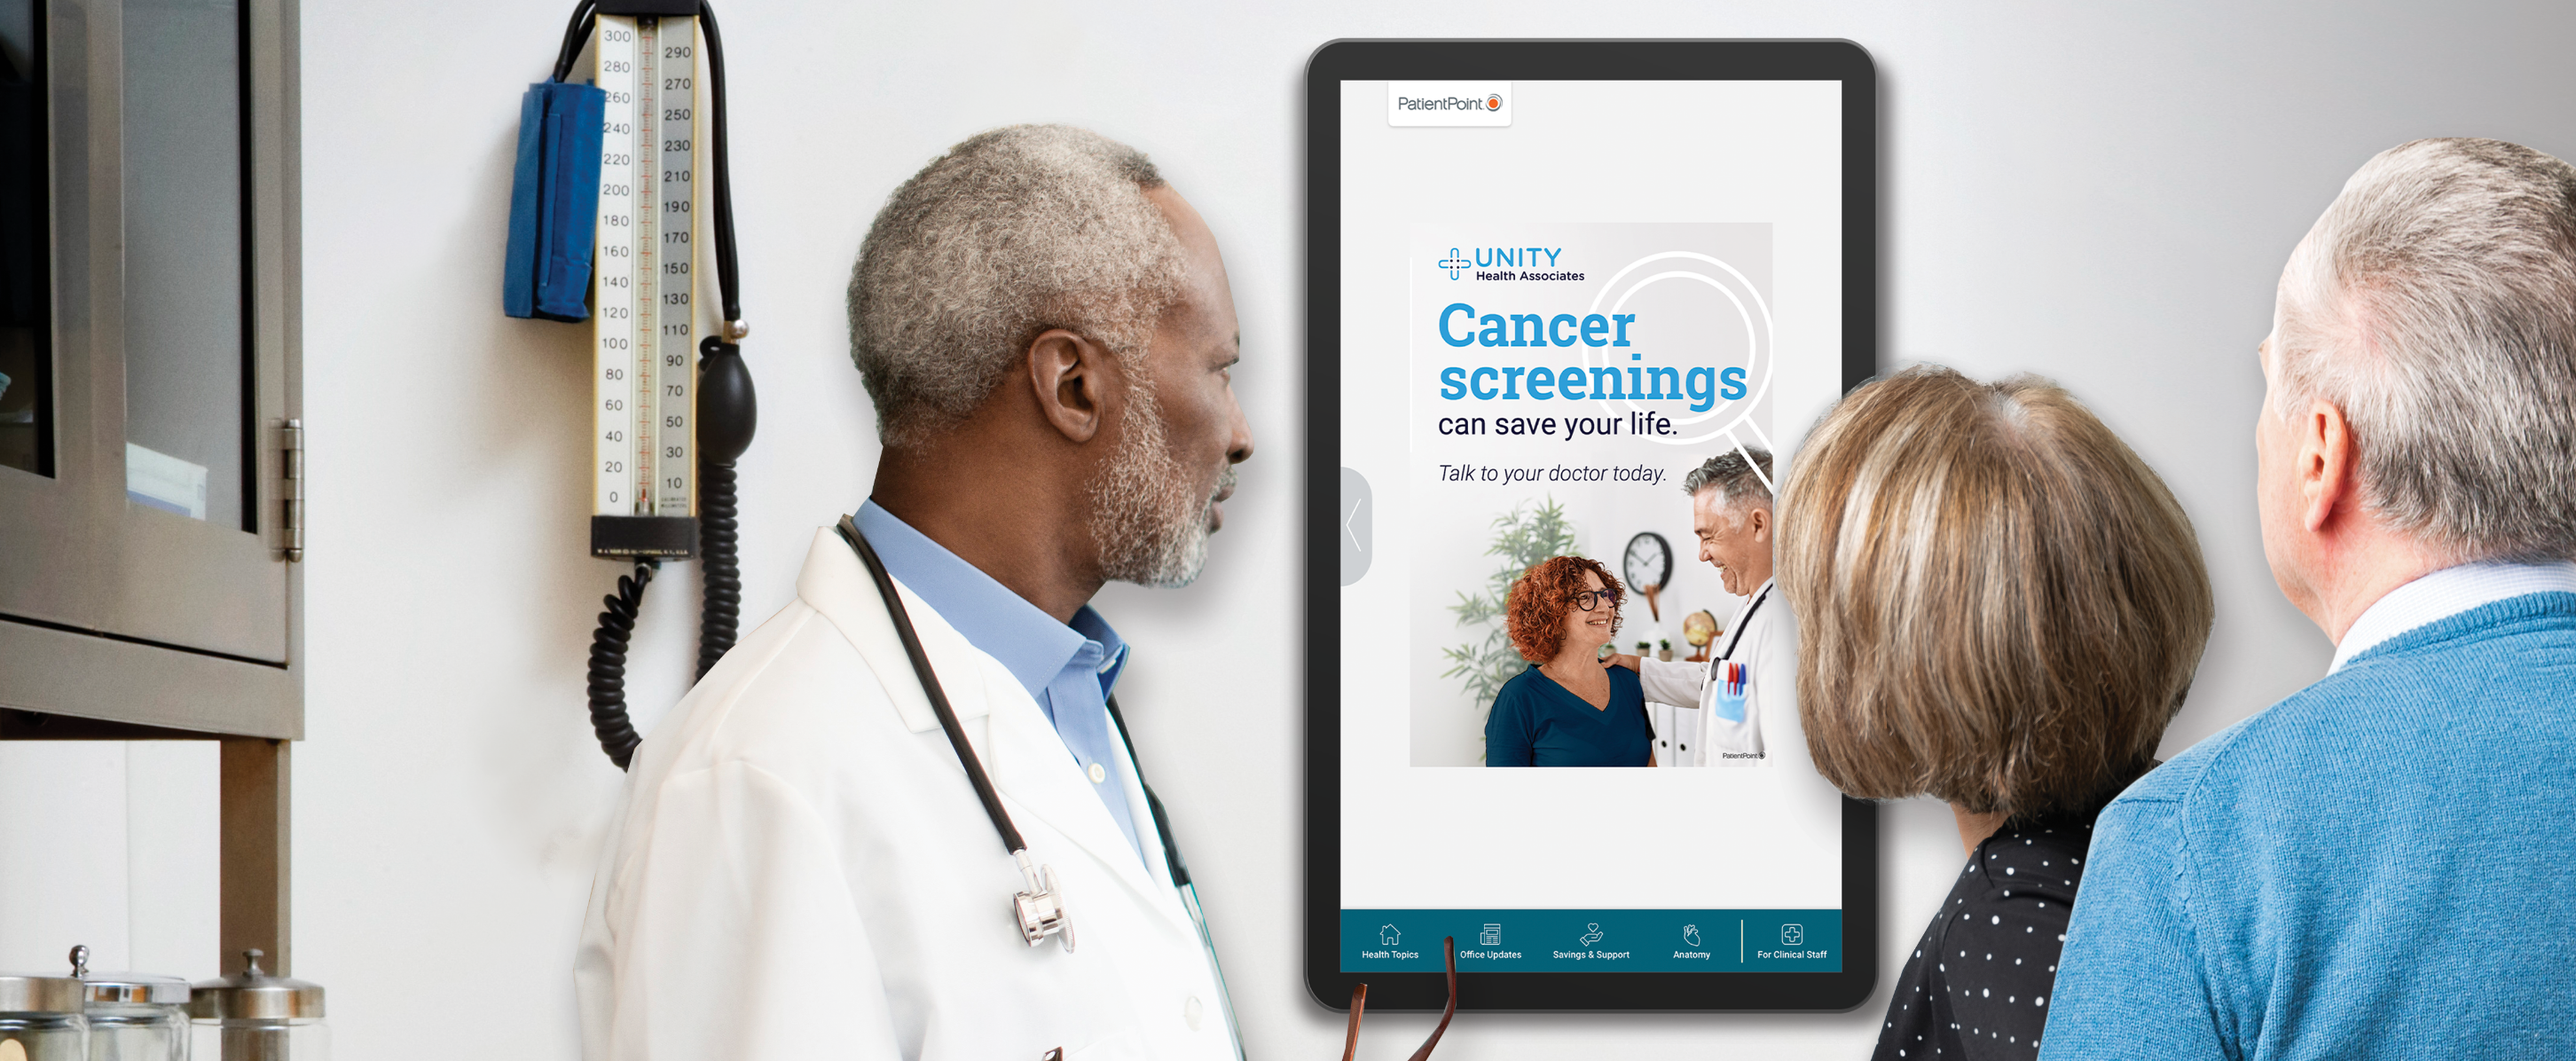 A provider and a patient viewing an exam room screen showing a cancer screening message